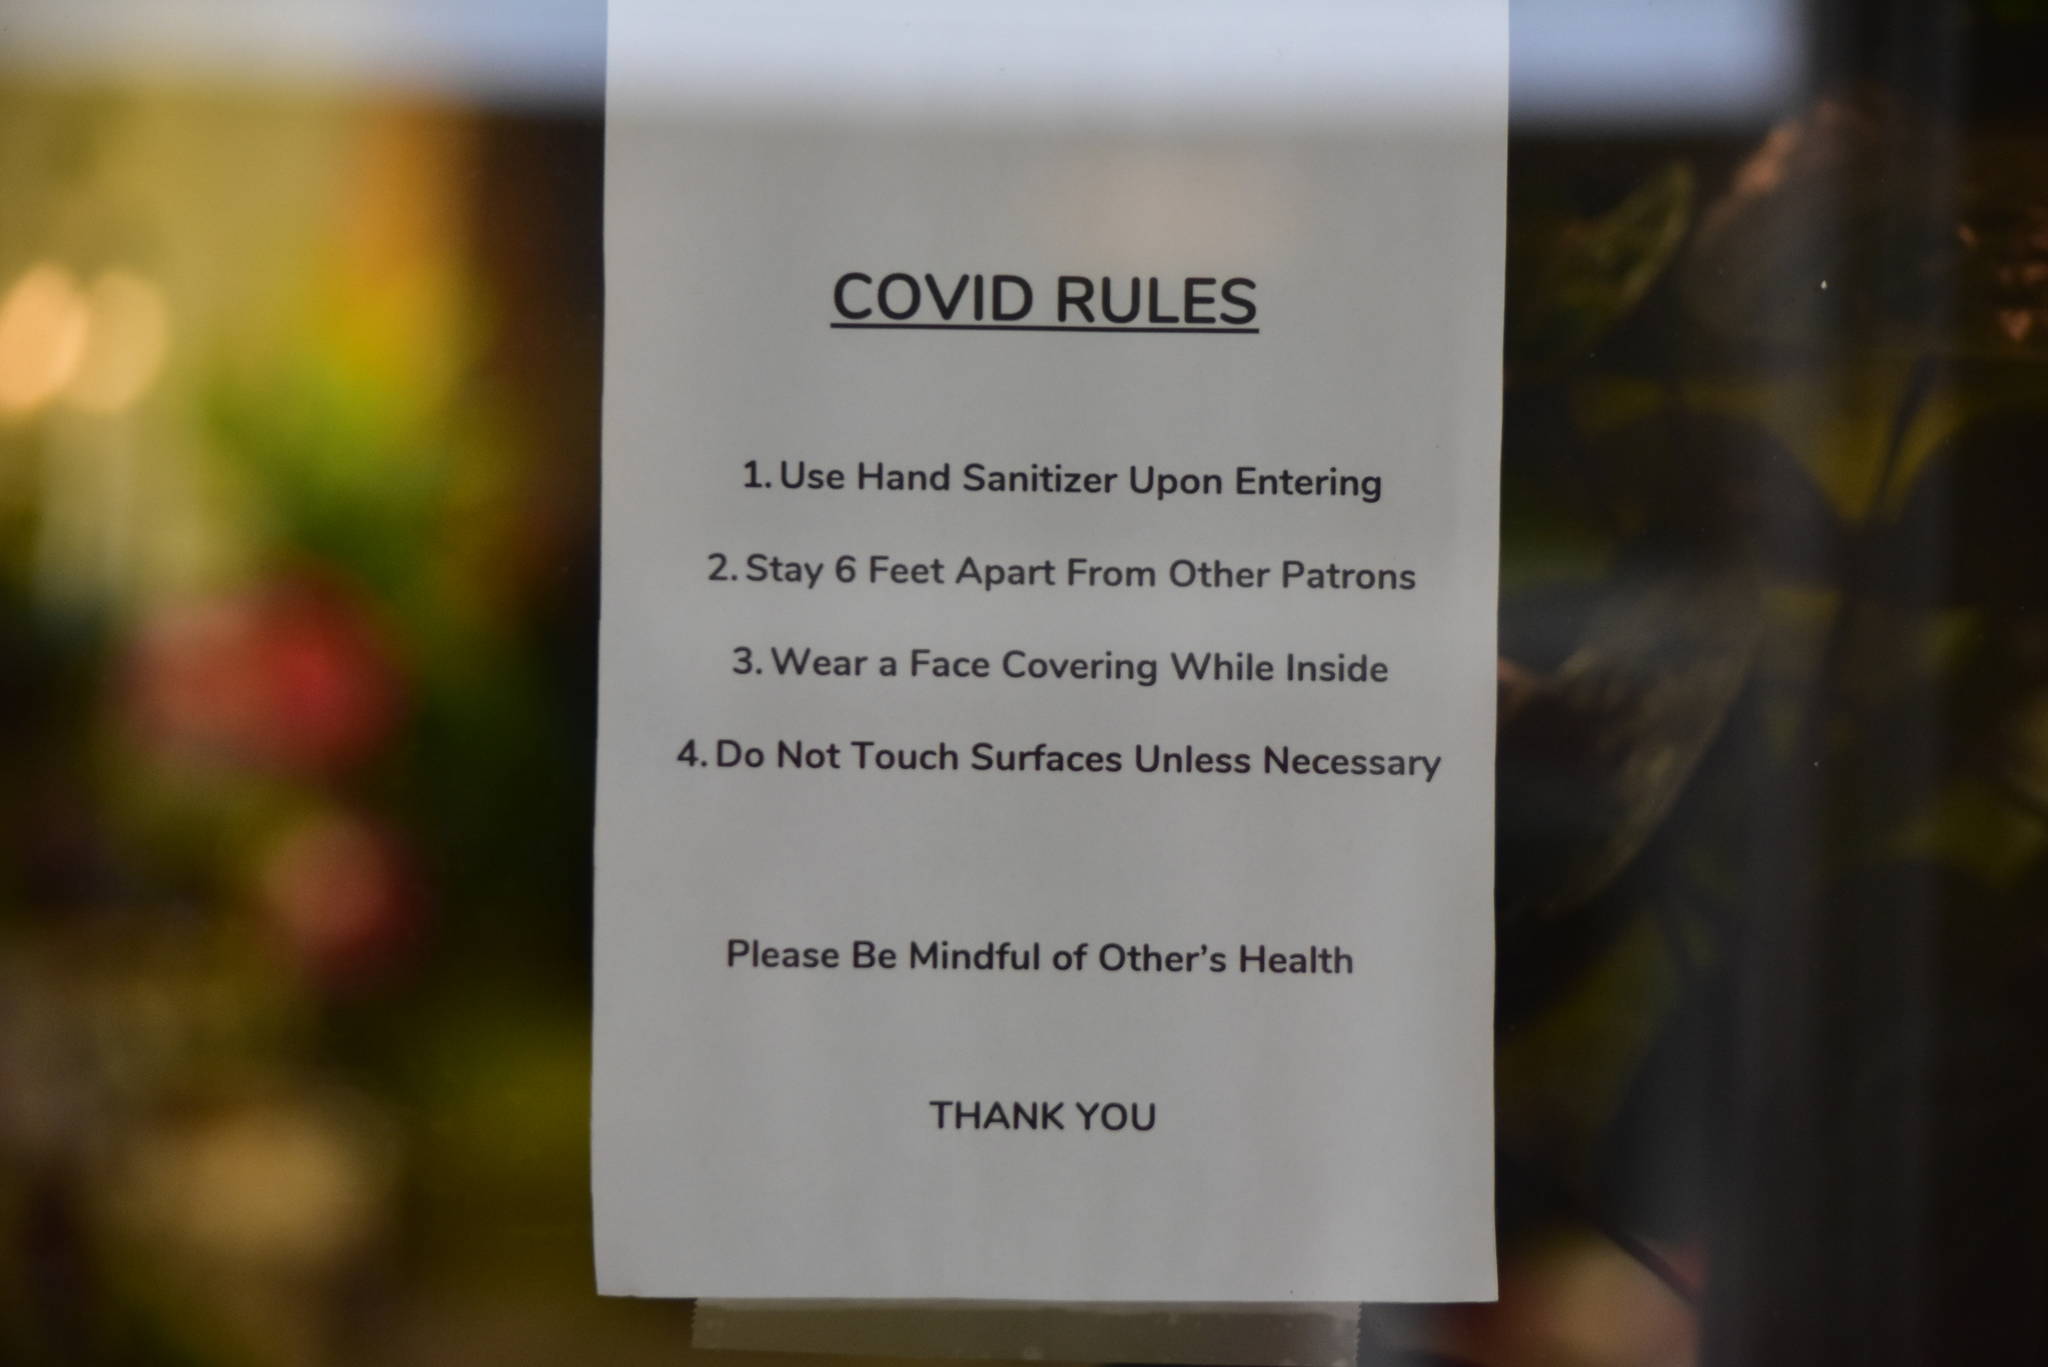 A sign in the window of a shop in downtown Juneau informs customers of rules for entering the business on Dec. 15, 2020. On Monday the City and Borough of Juneau announced it was relaxing some of the restrictions on businesses as the spread of COVID-19 in the community had decreased. (Peter Segall / Juneau Empire)